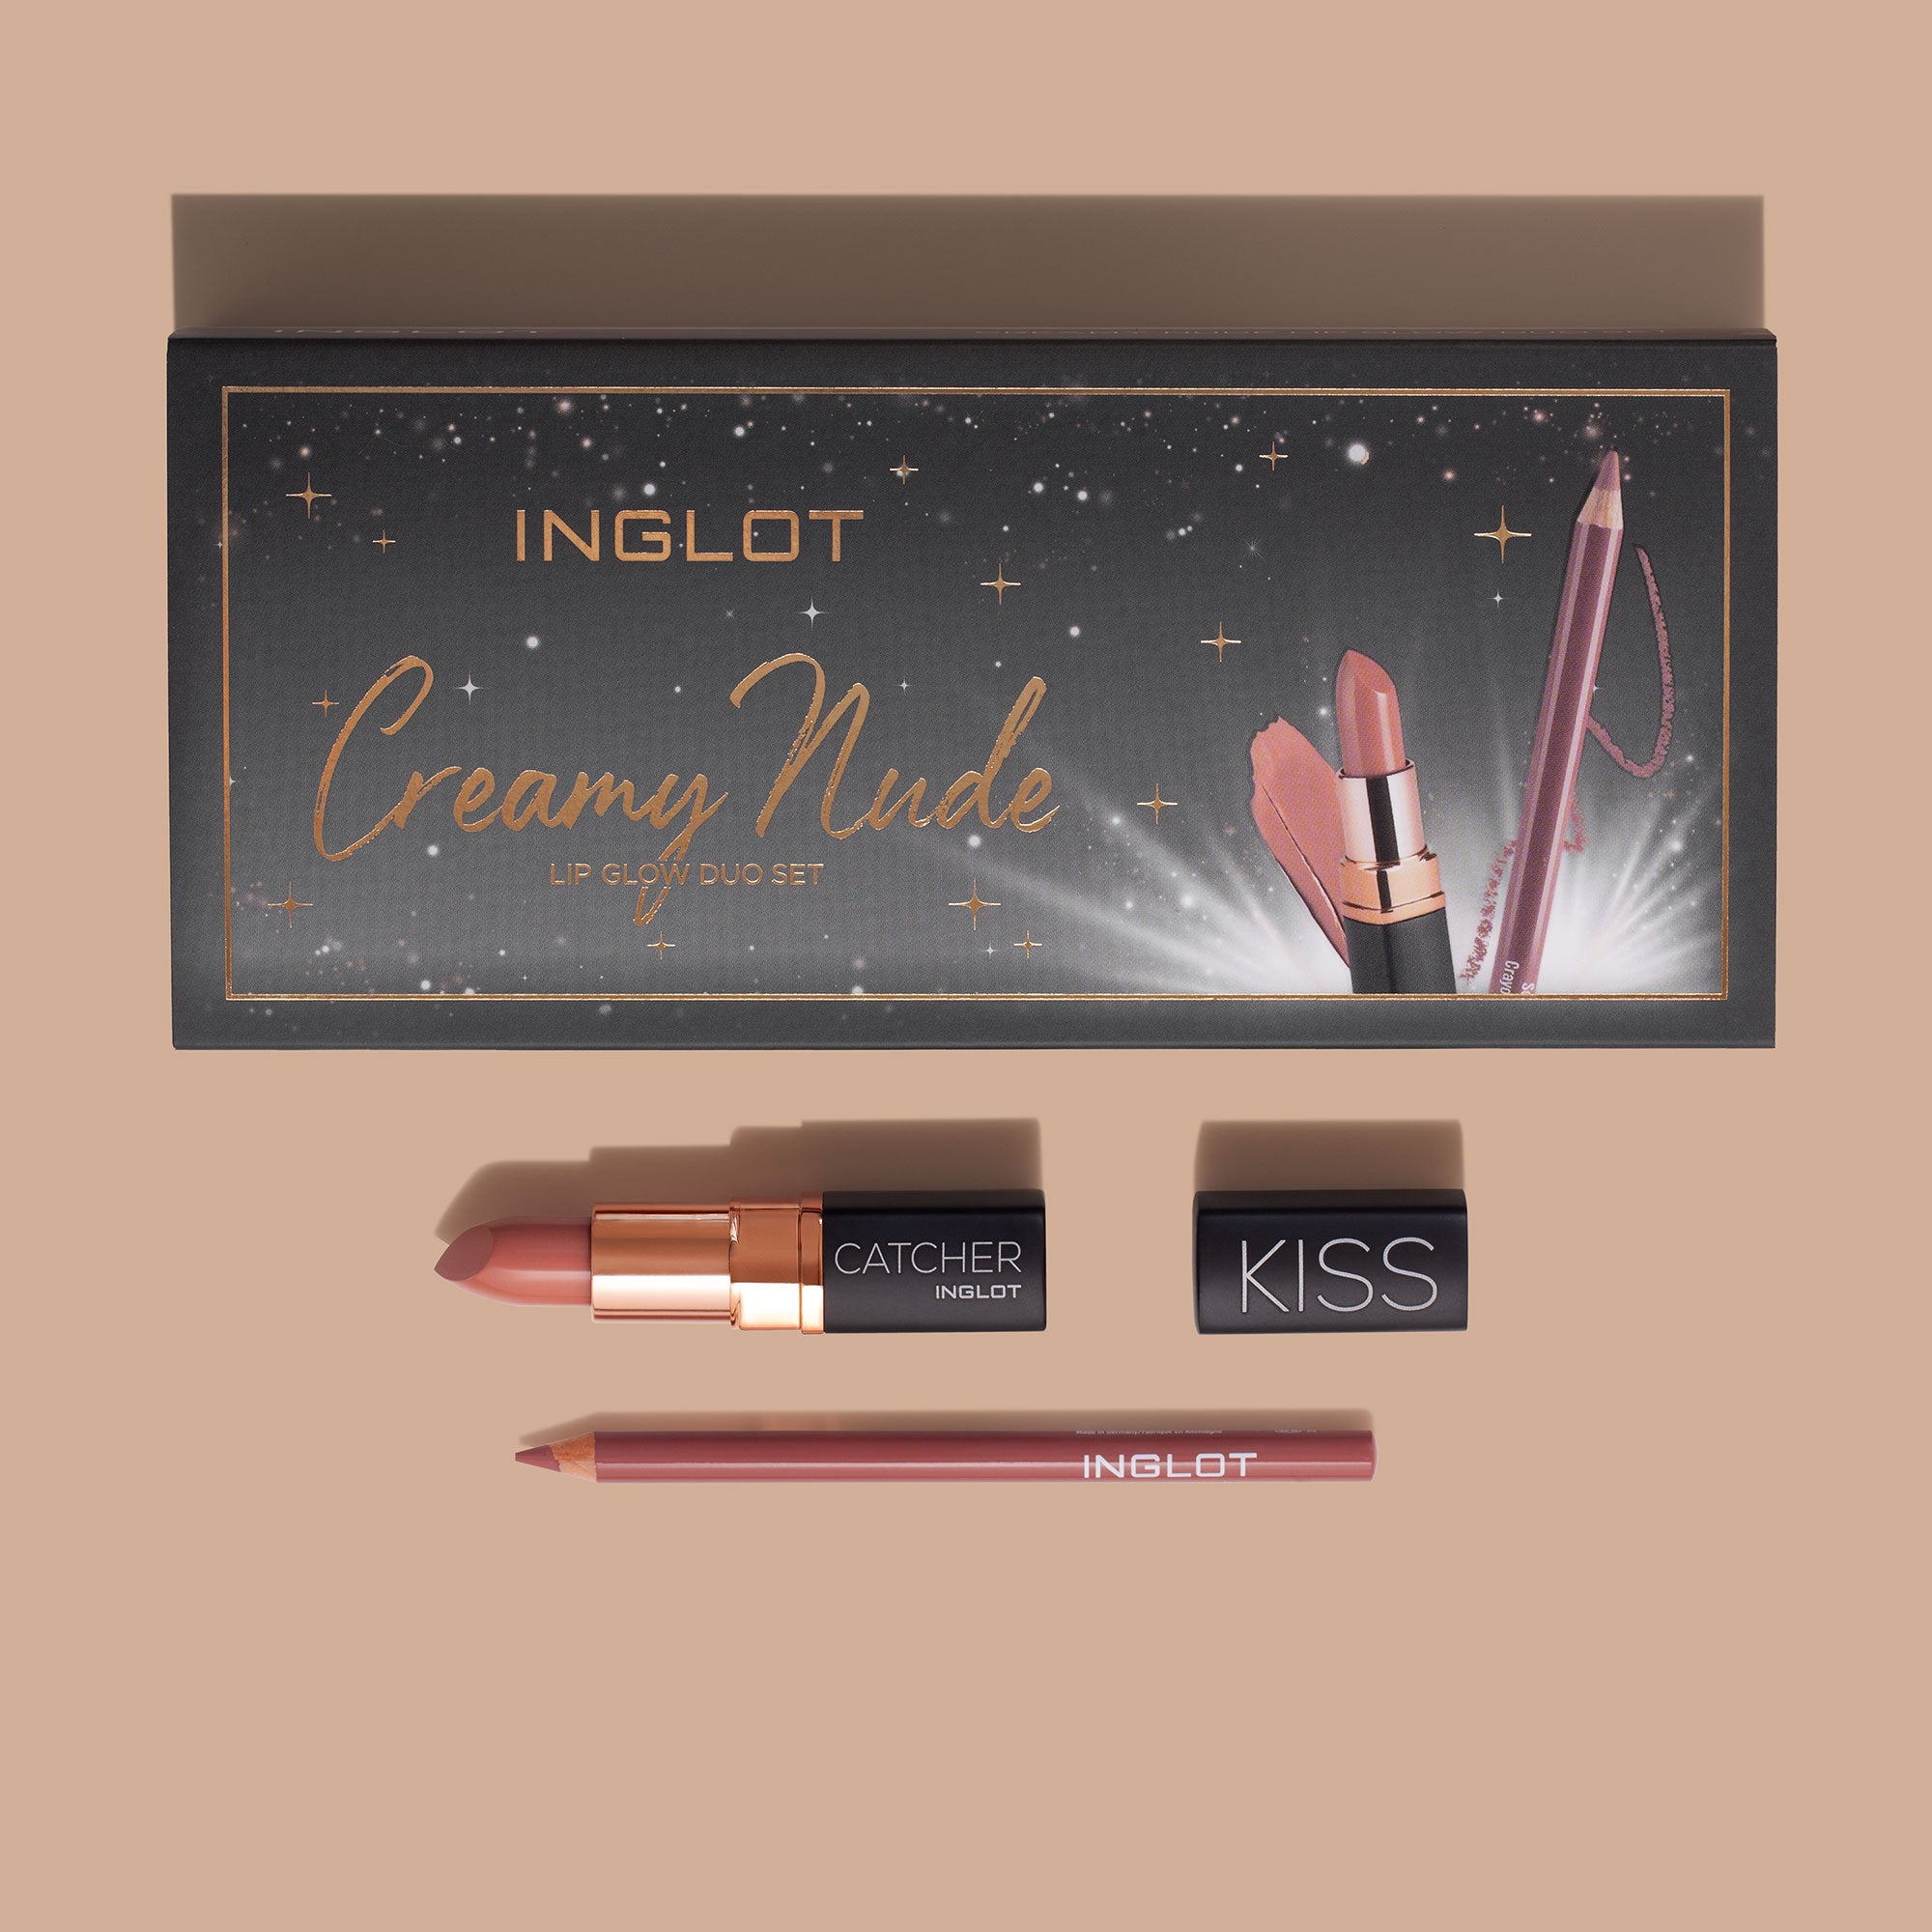 Inglot Creamy Nude Lip Glow Duo Gift Set, with products open